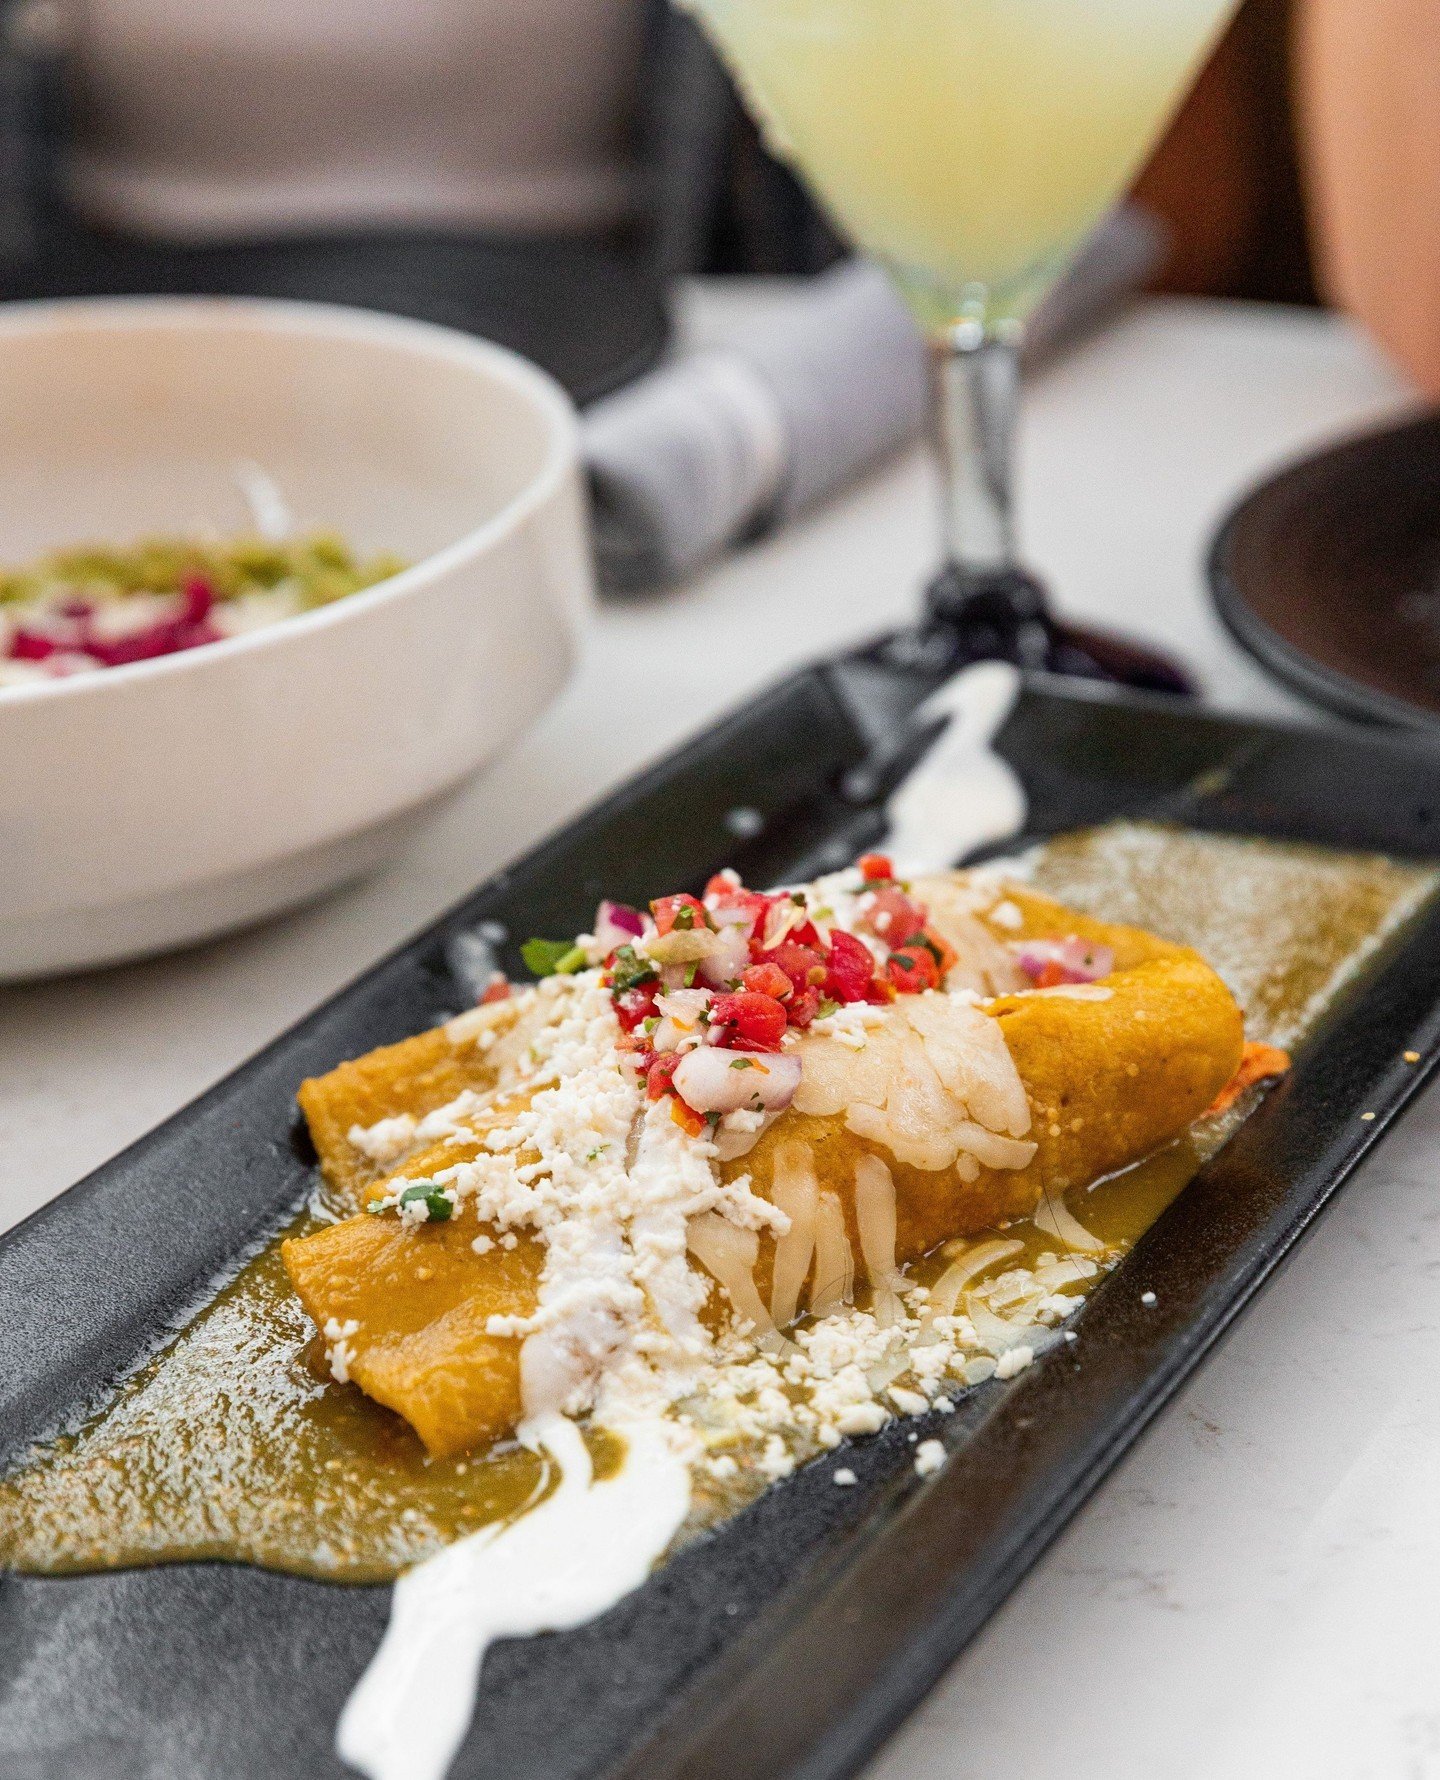 Delicious enchiladas, refreshing margaritas and patio vibes... summer is here, amigos! 😎⁠
⁠
Come enjoy the weather and the best margaritas, and unforgettable food here at The Mexicano 🔥⁠
⁠
Make a reservation on OpenTable! We look forward to seeing 